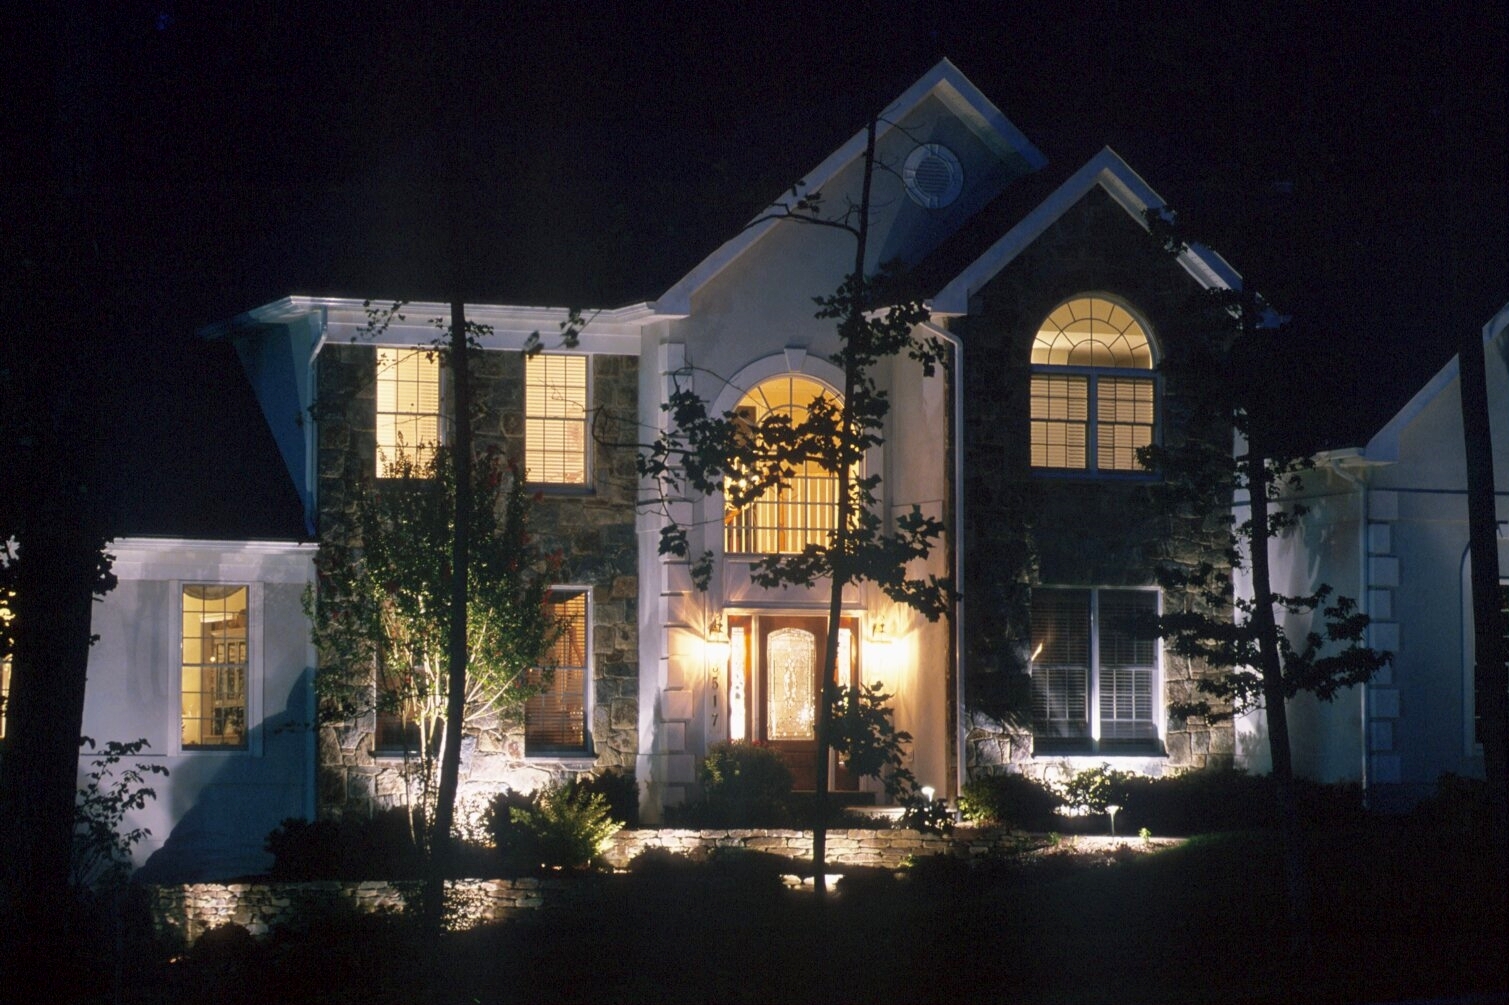 Commercial Landscape Lighting Services in Annapolis